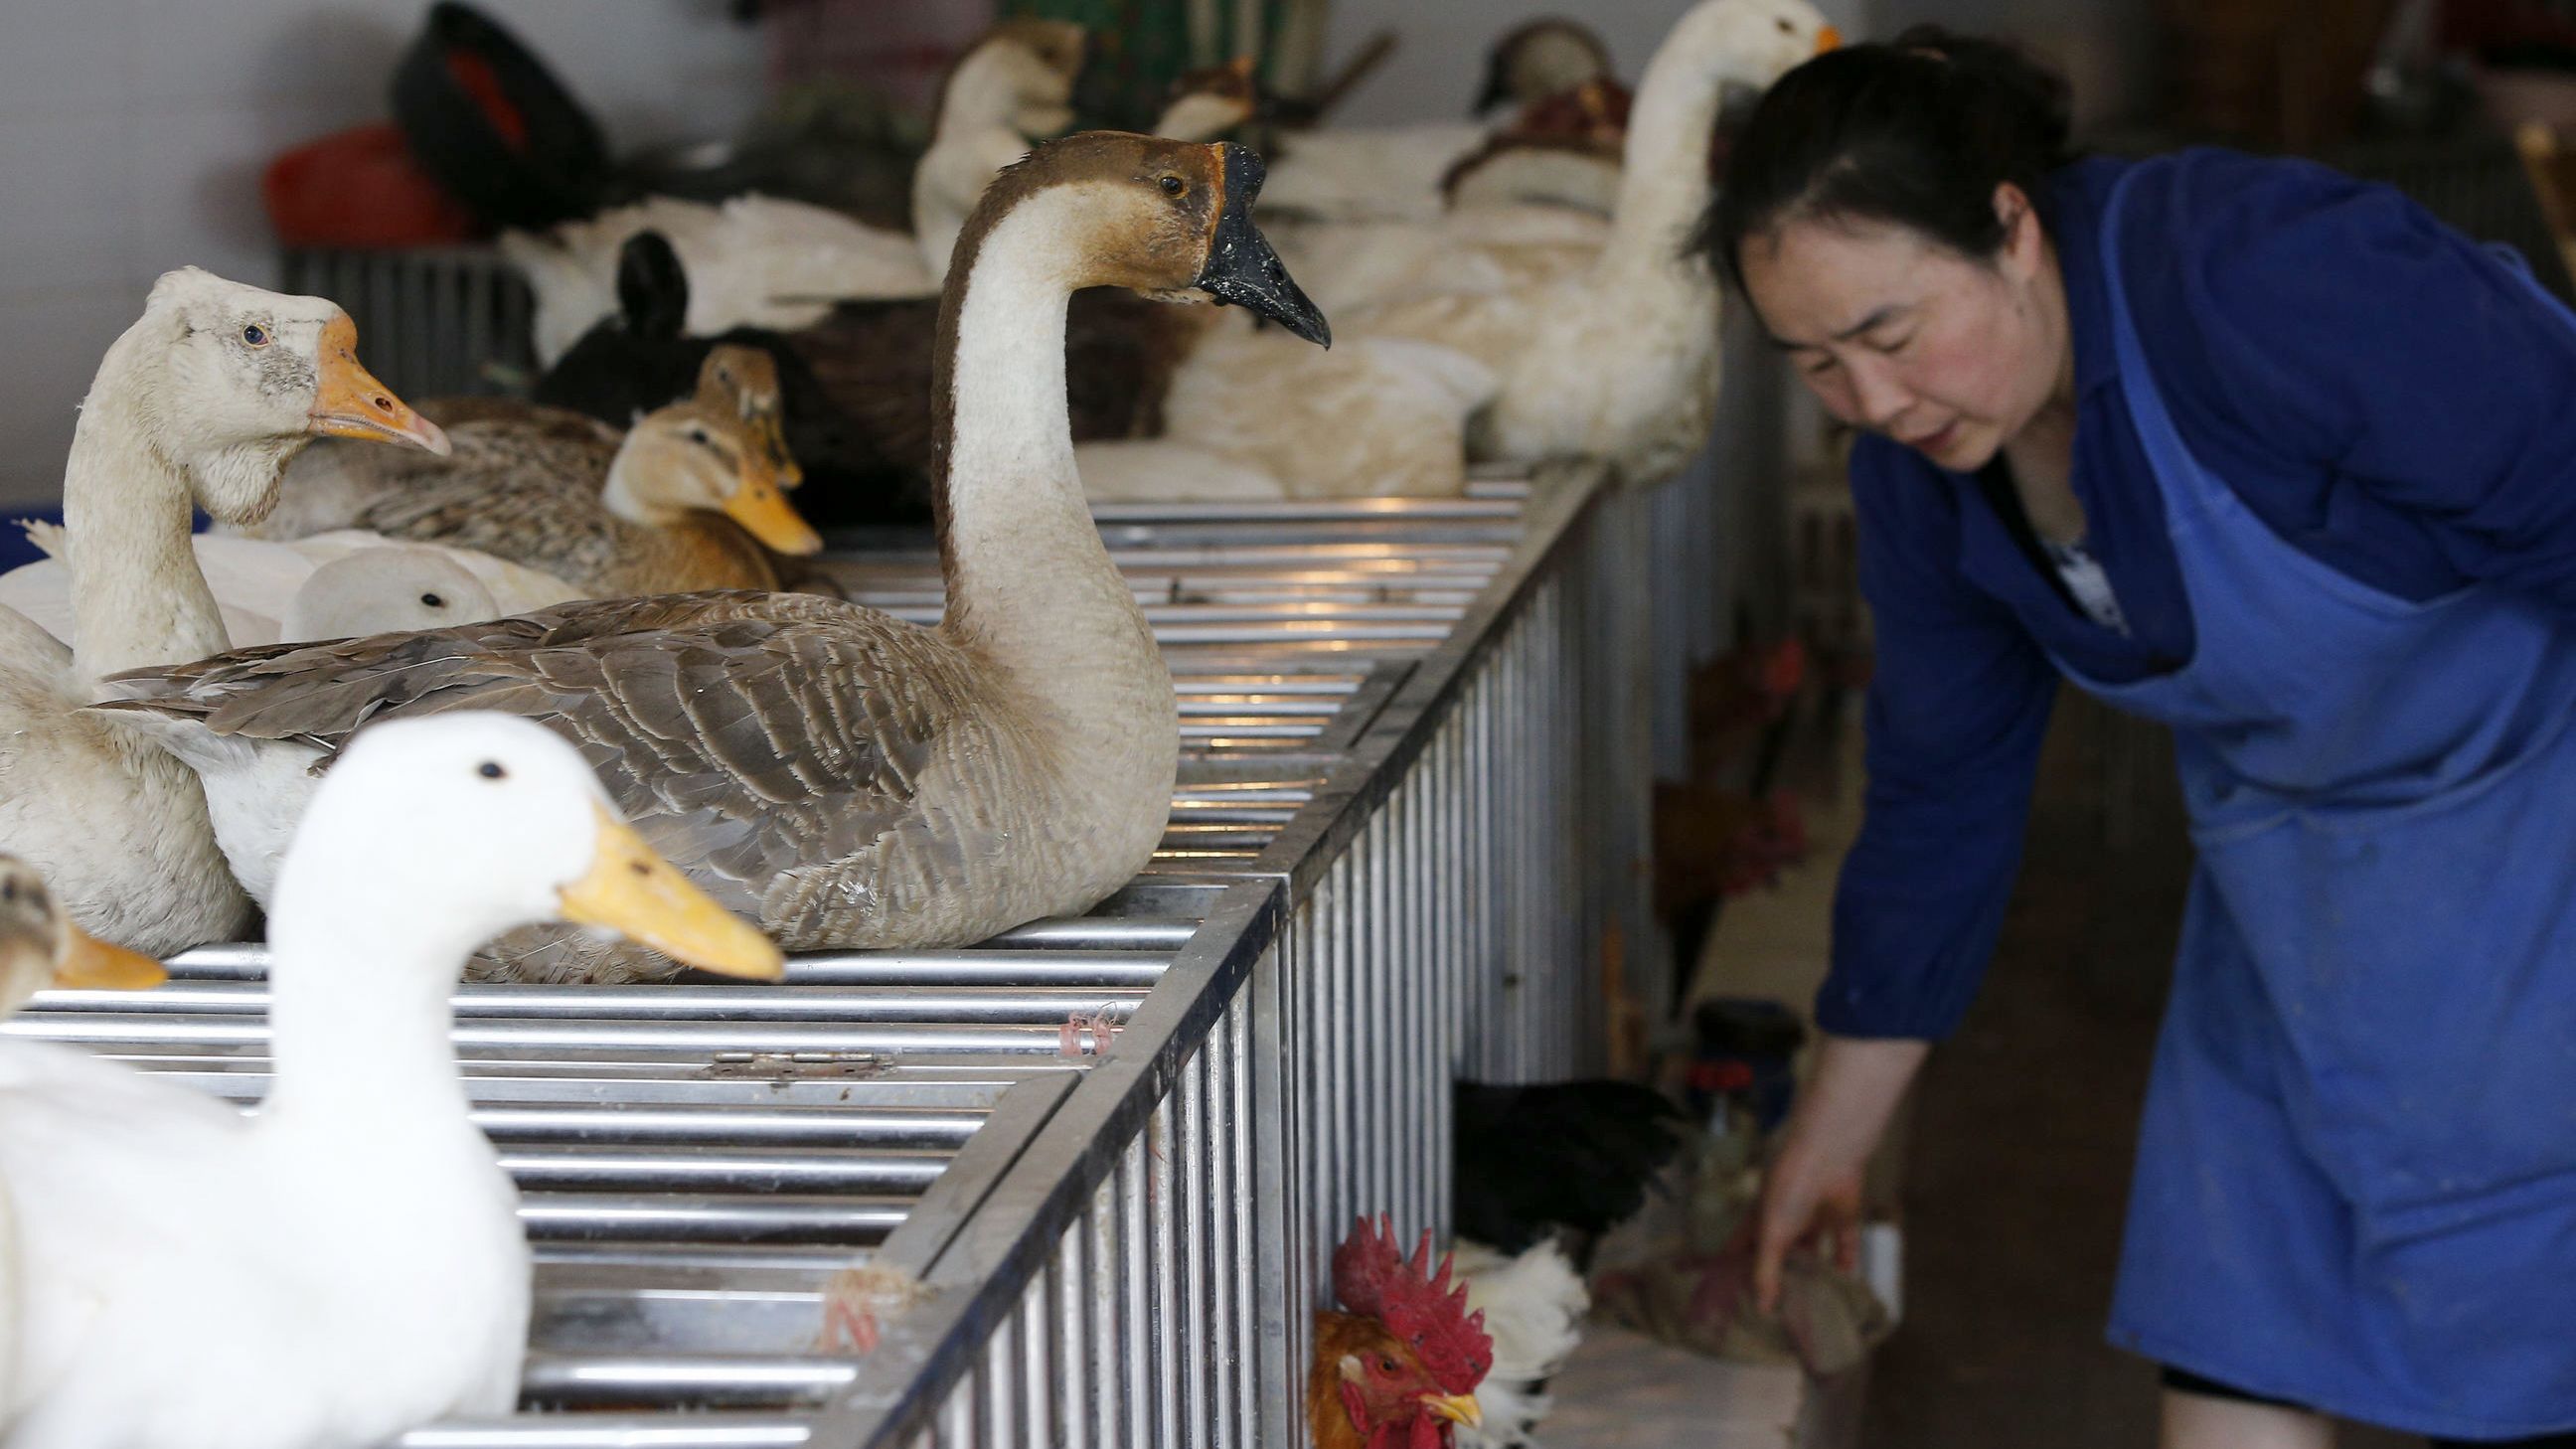 Evidence suggests that poultry markets like this one could be the primary source of human infection with H7N9, an expert says.